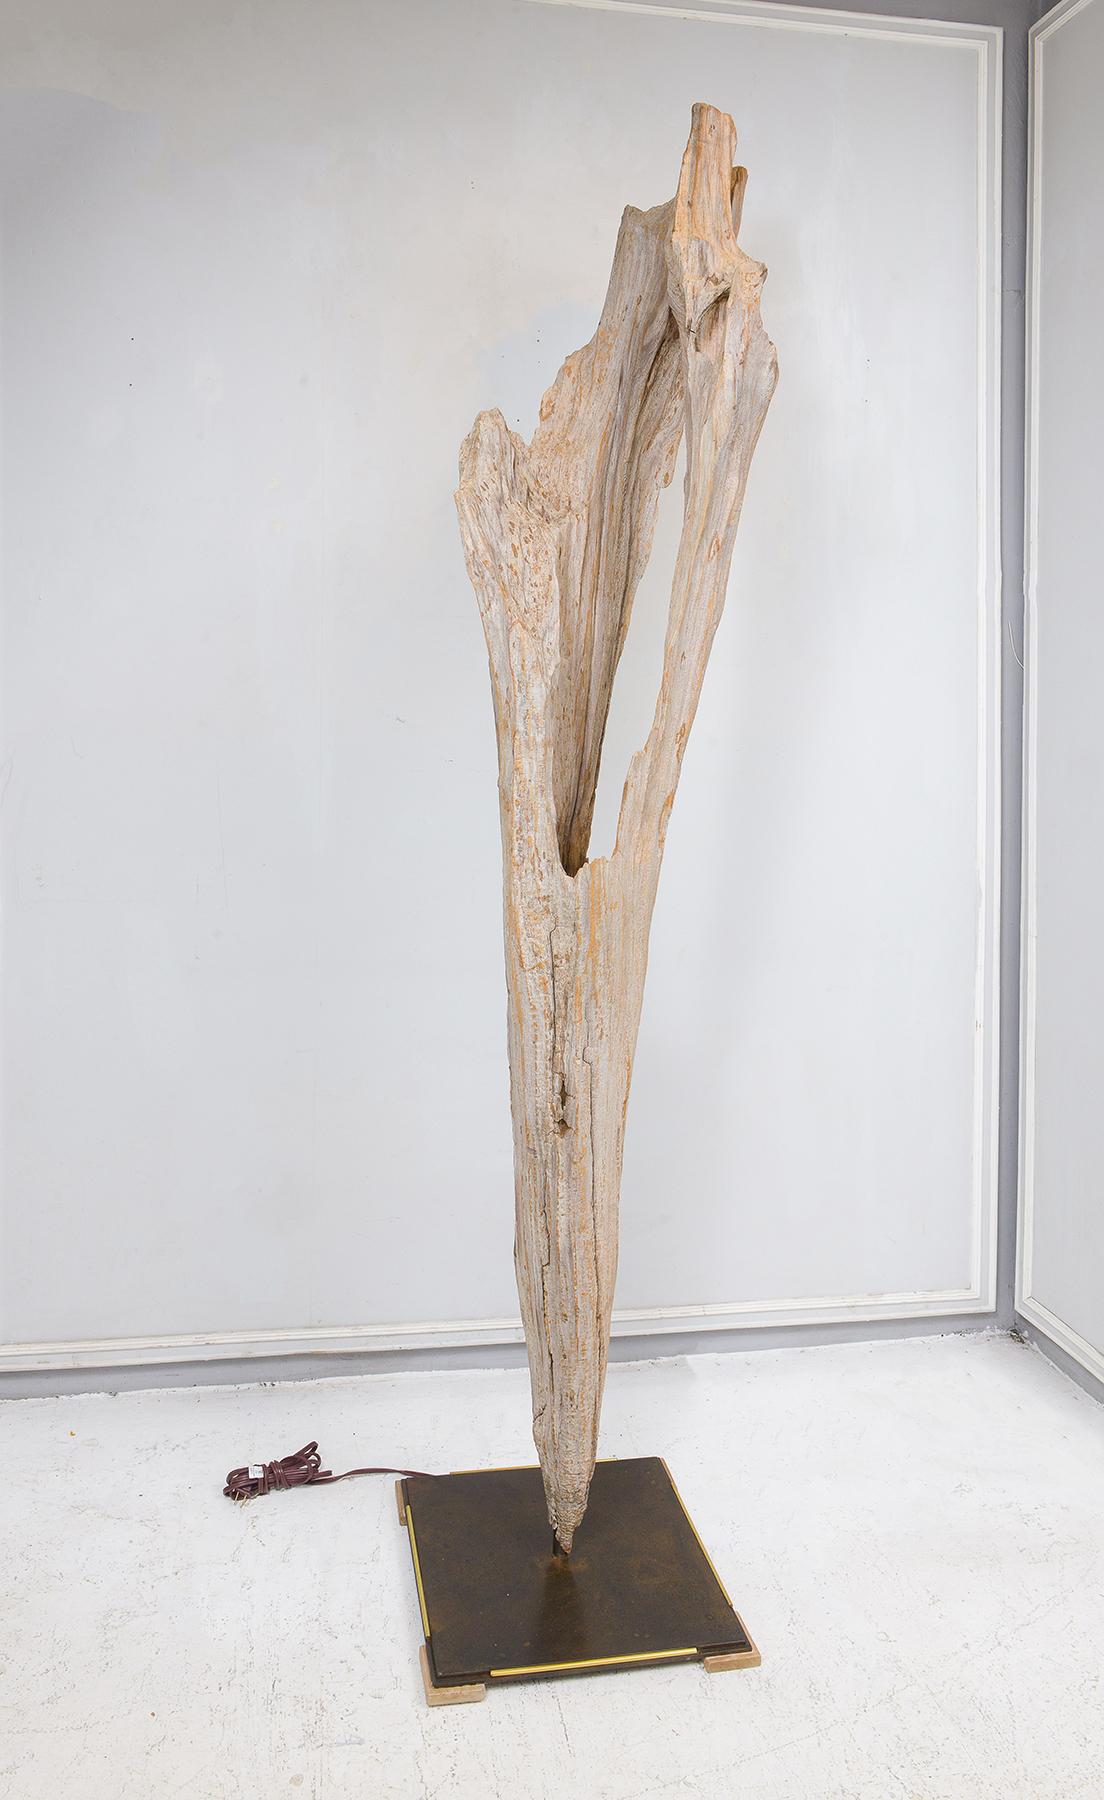 Sculptural Bespoke Driftwood floor lamp.
Note this item can be made to order.
One floor lamp is currently available.